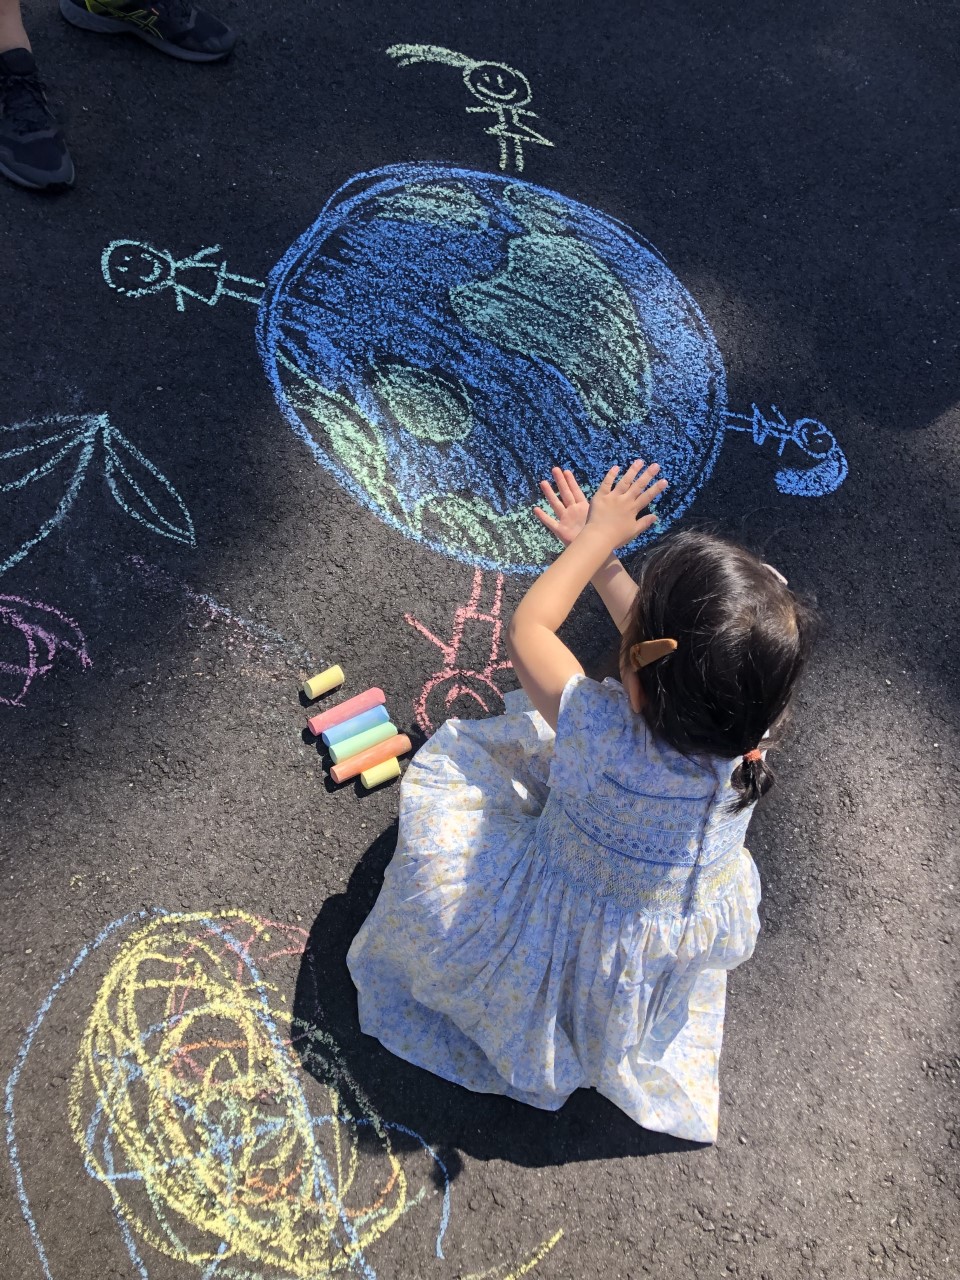 Child drawing with chalk